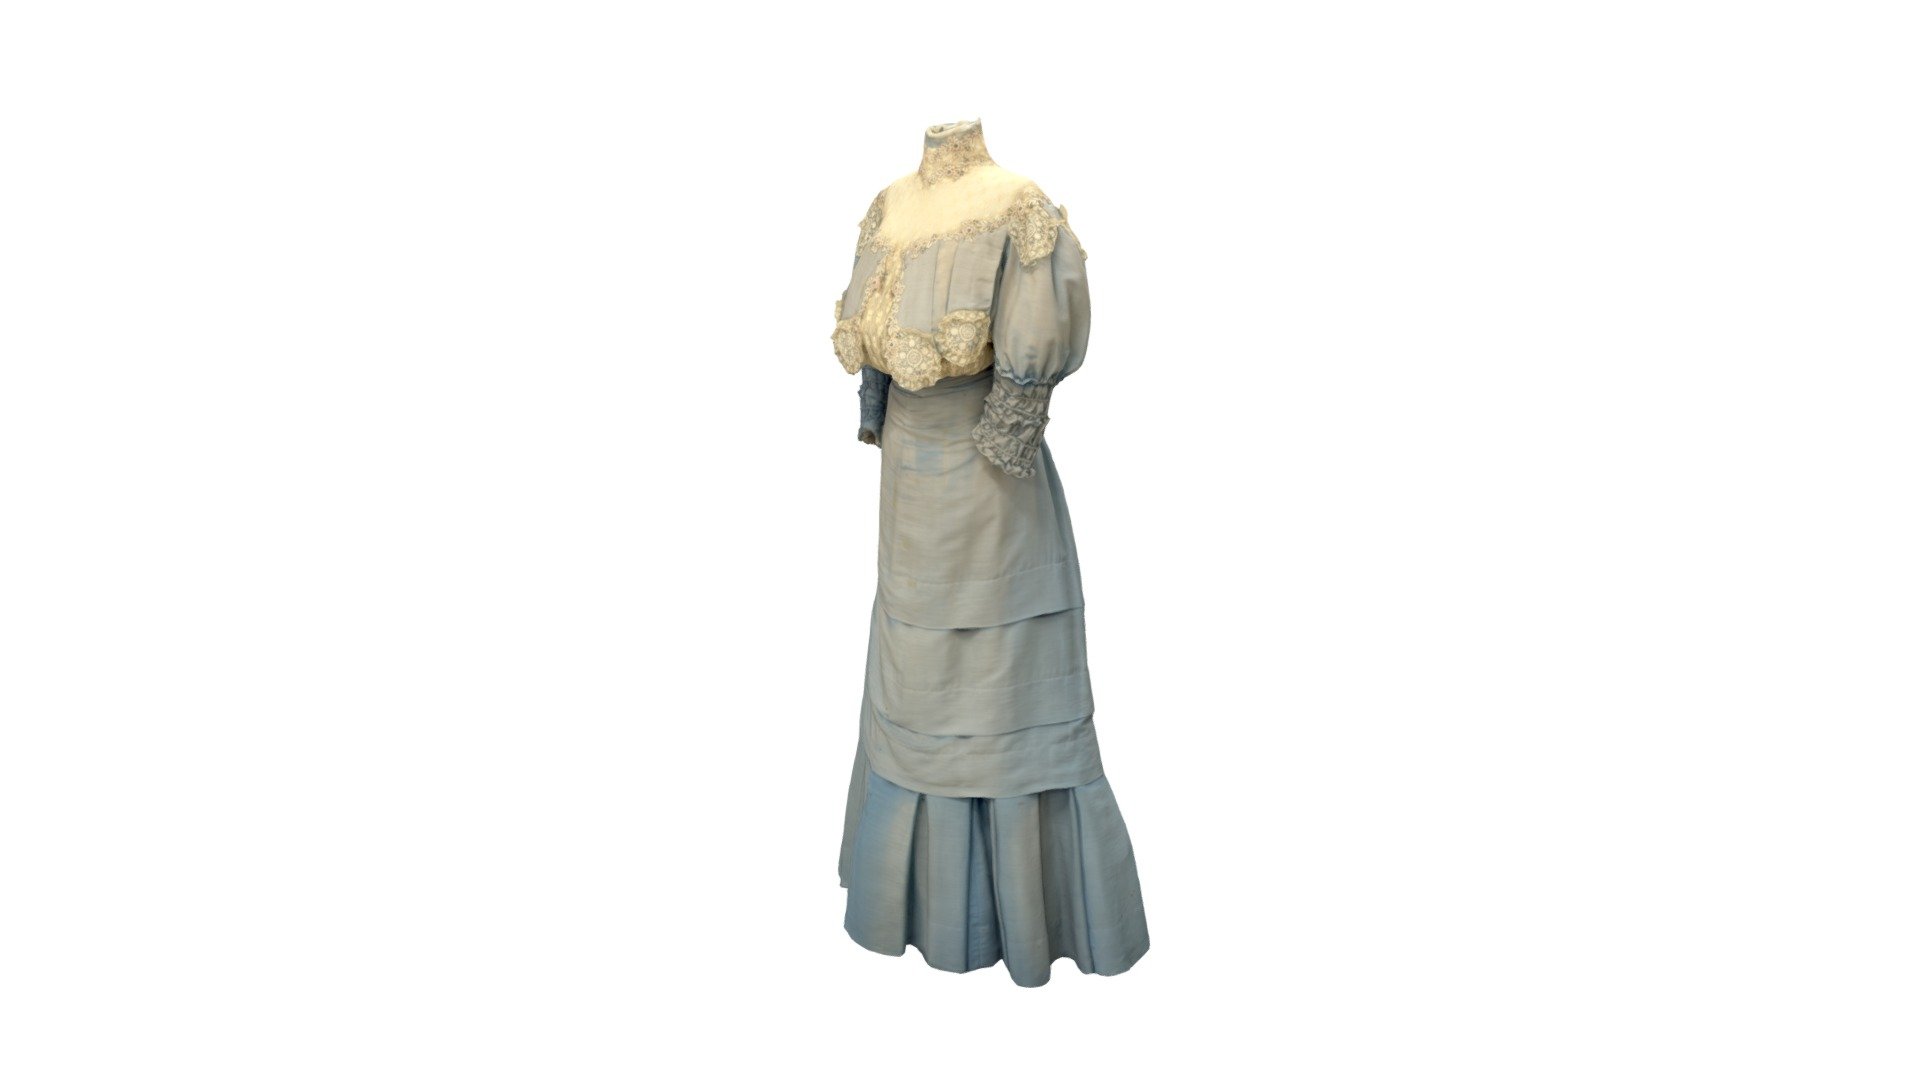 This blue silk dress with its classic turn-of-the-20th-century silhouette was worn by Anna Maxwell in her wedding to Fort Collins druggist A.W. Scott 3d model